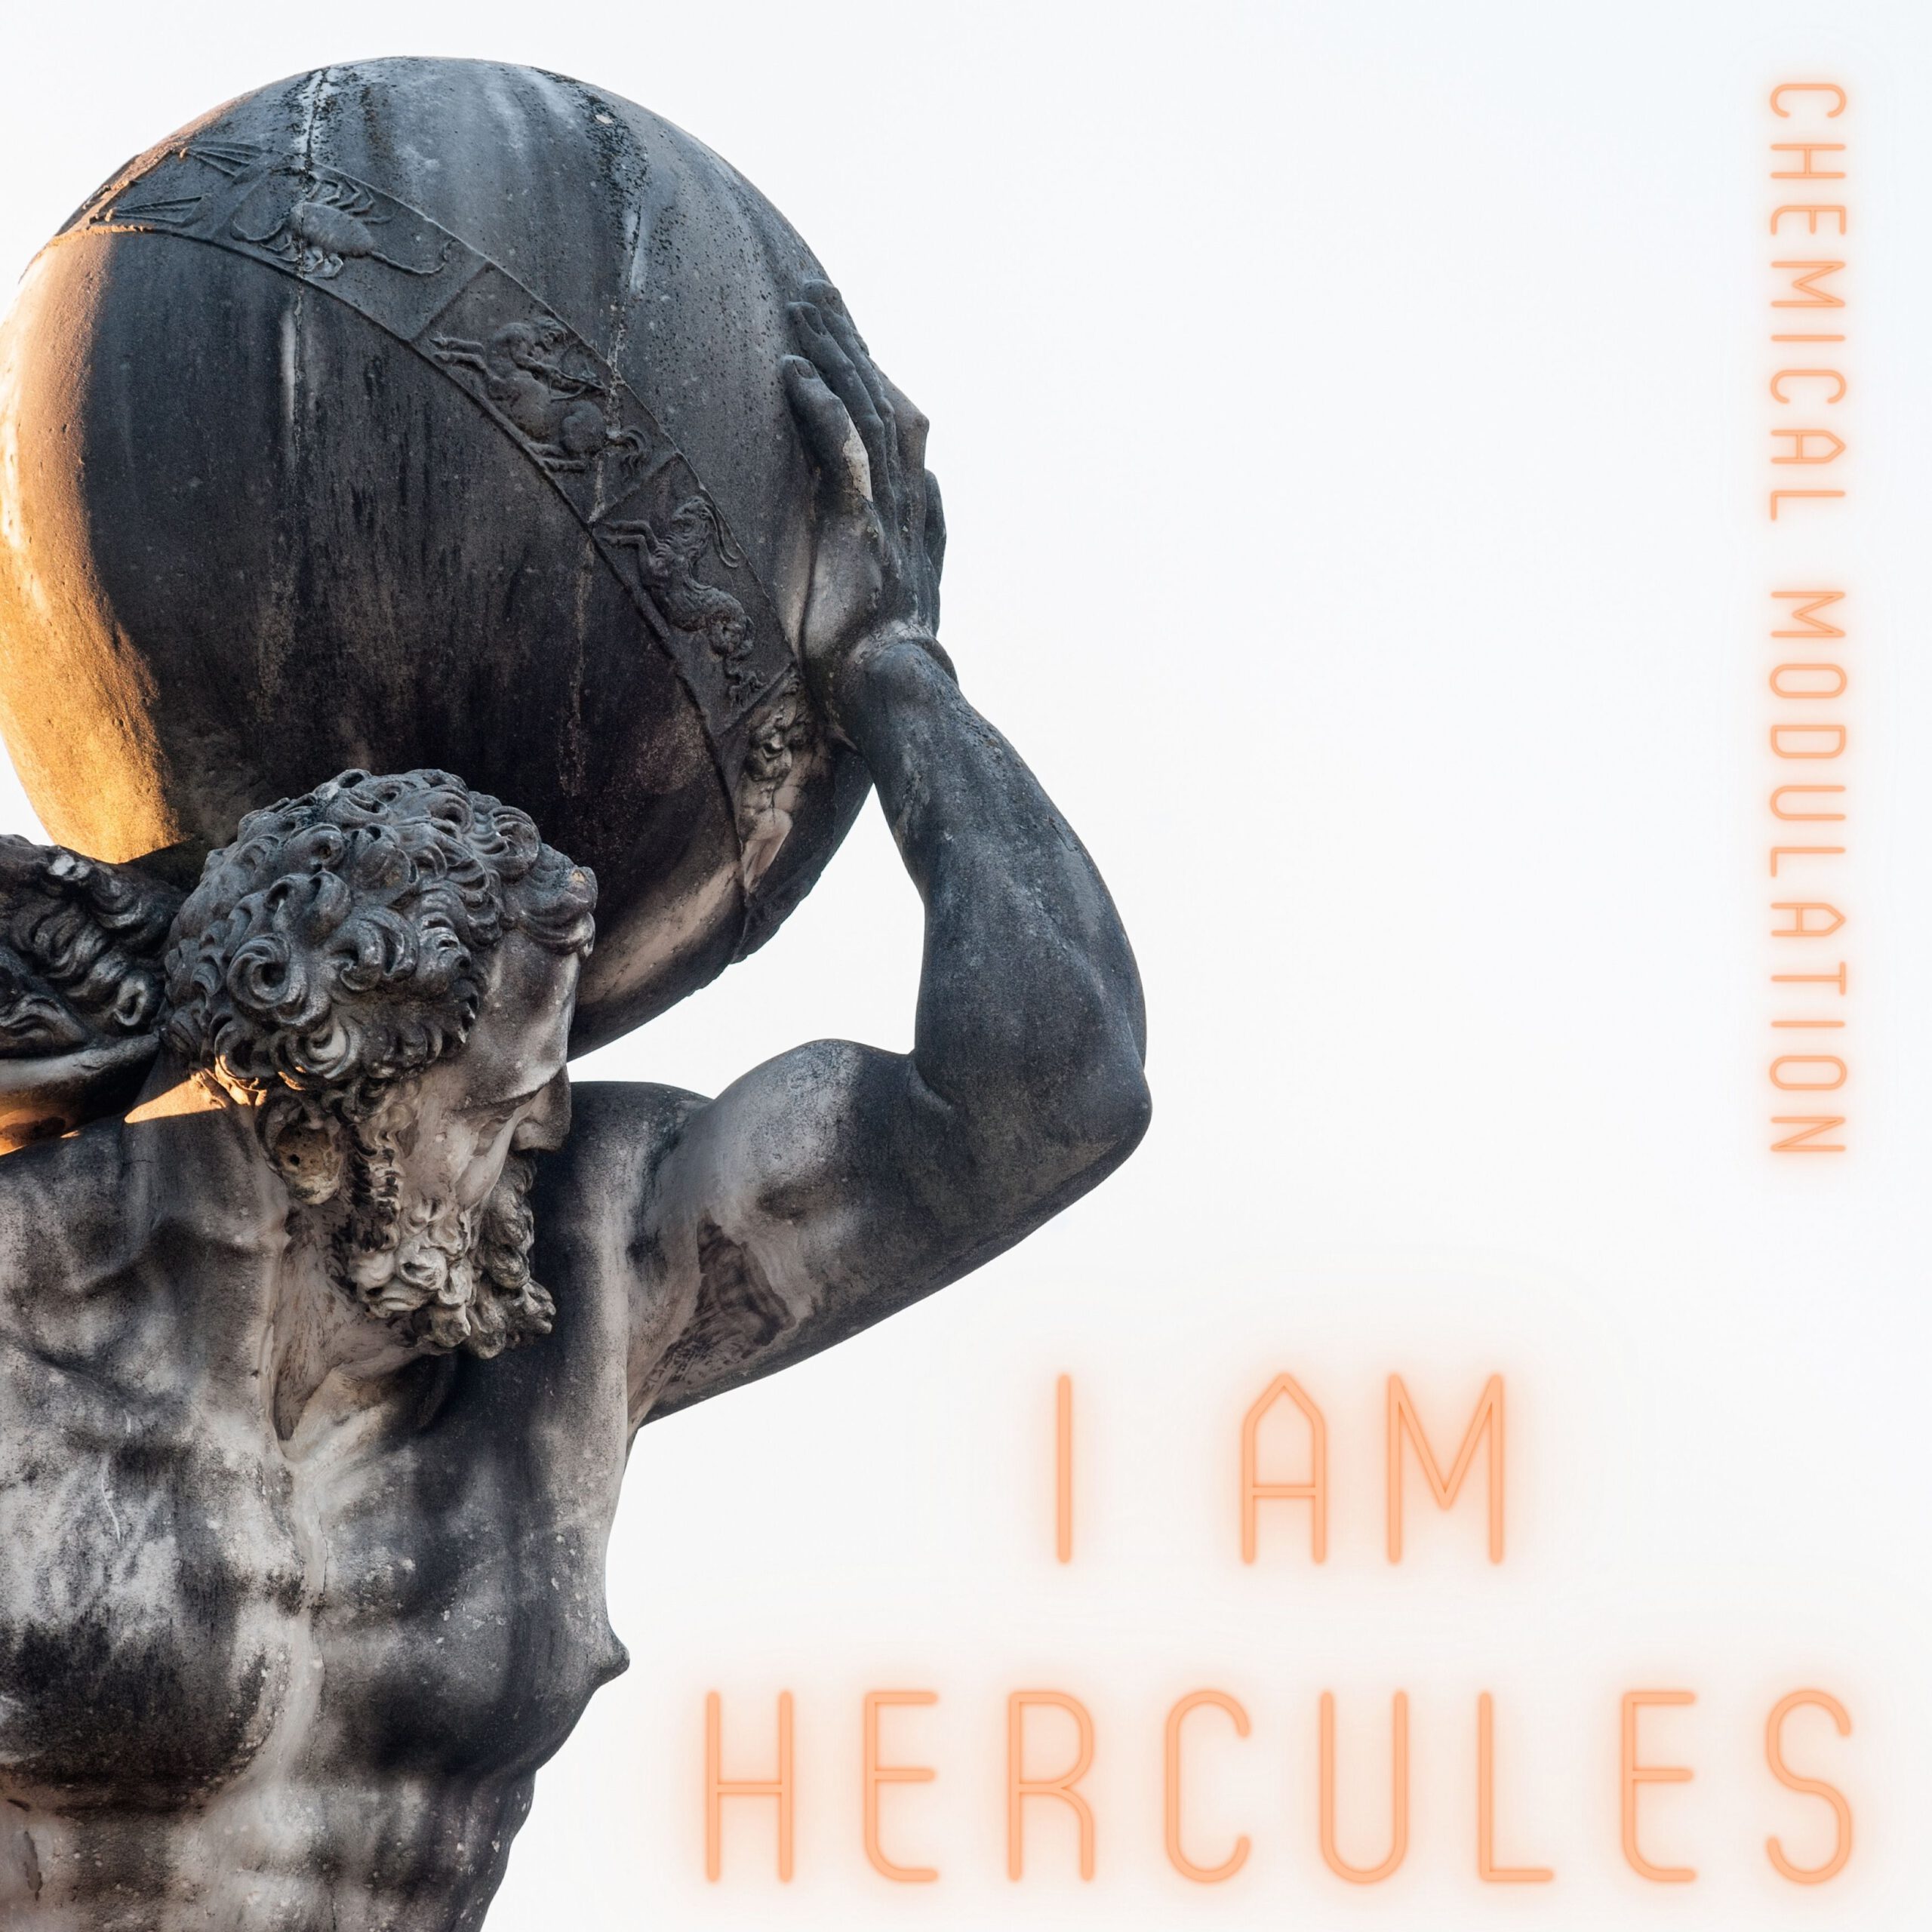 I Am Hercules is out